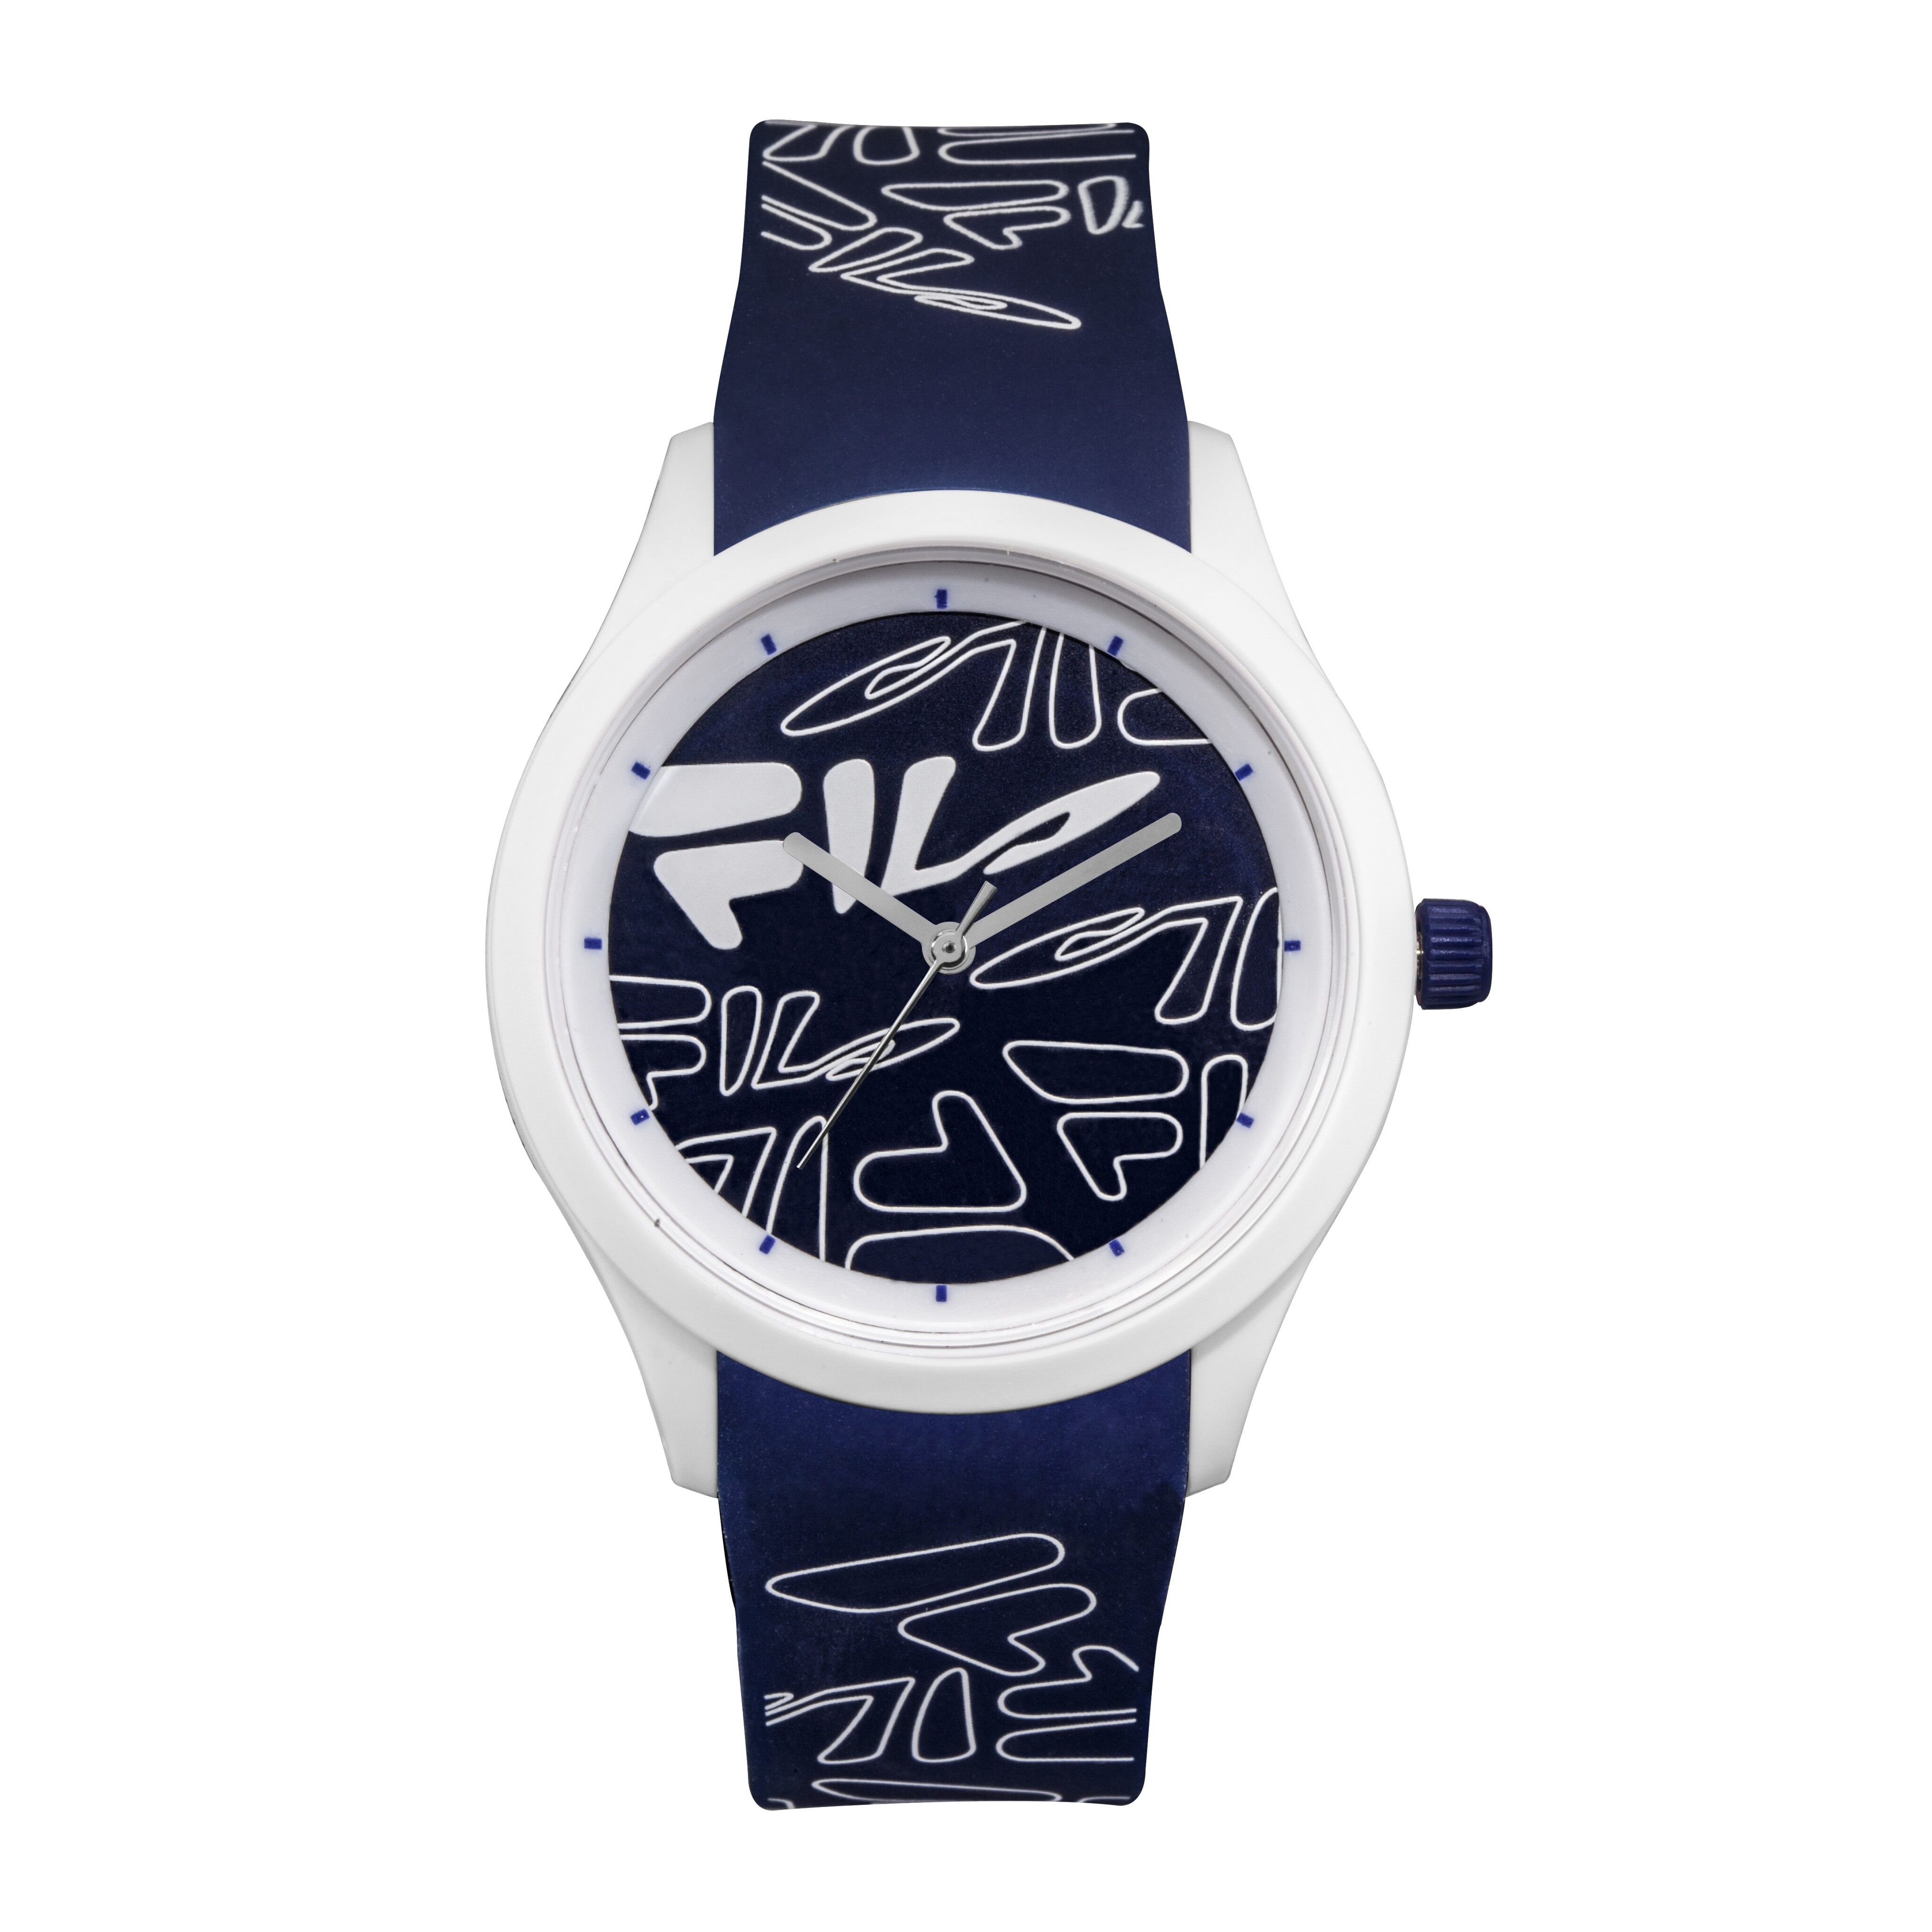 Fila FILA Mens Chronograph Watch 38-007-001 - Mens Watches from The Watch  Corp UK